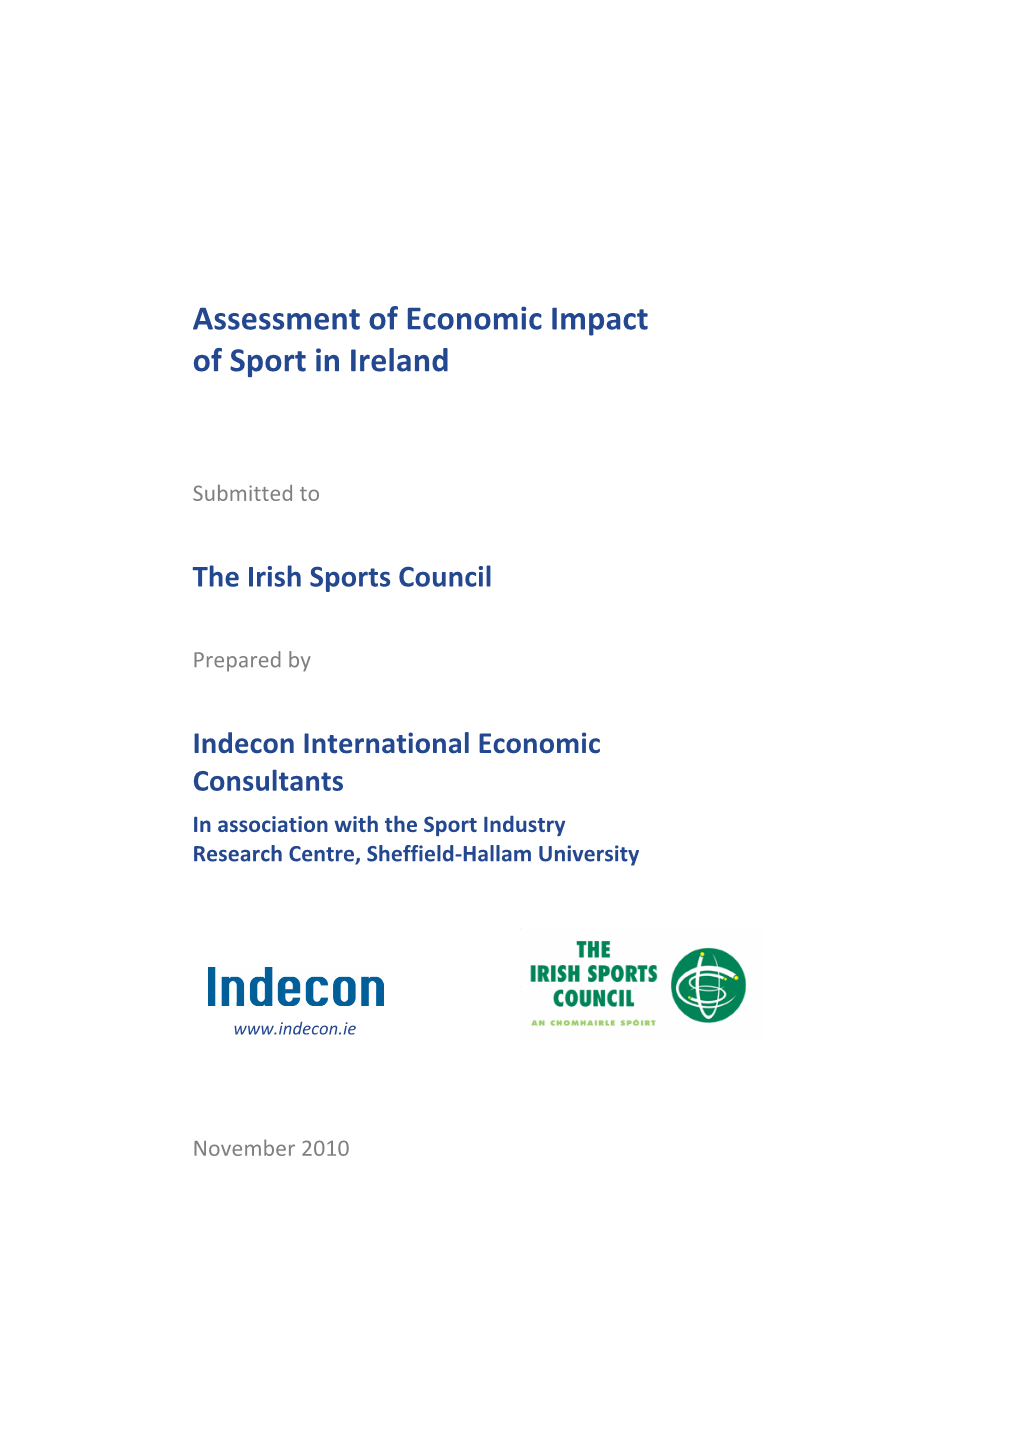 Assessment of the Economic Impact of Sport in Ireland 2010